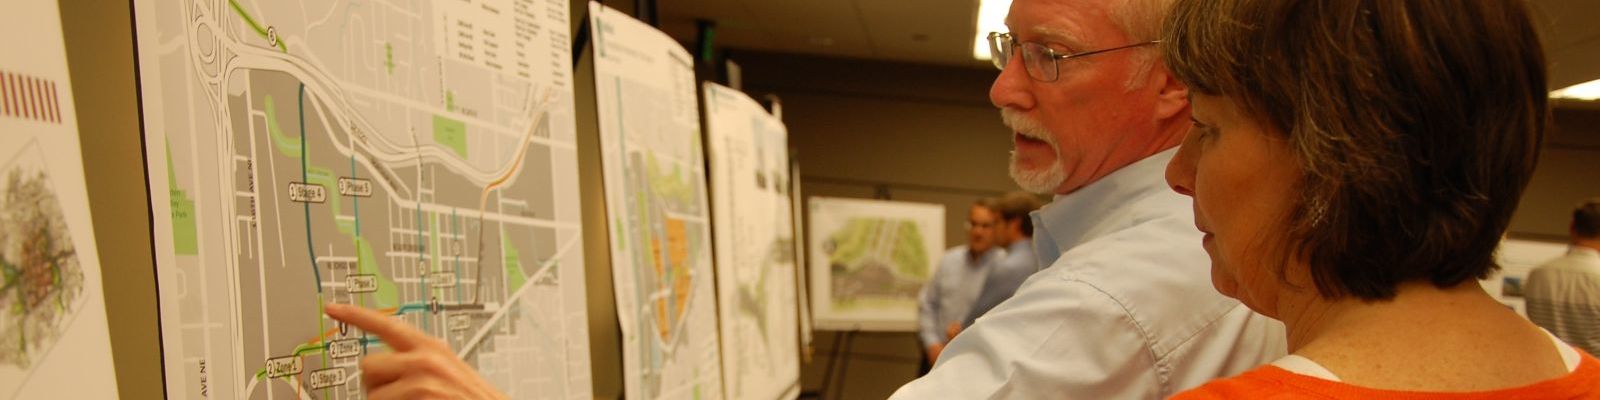 Image of person pointing at a map during an open house